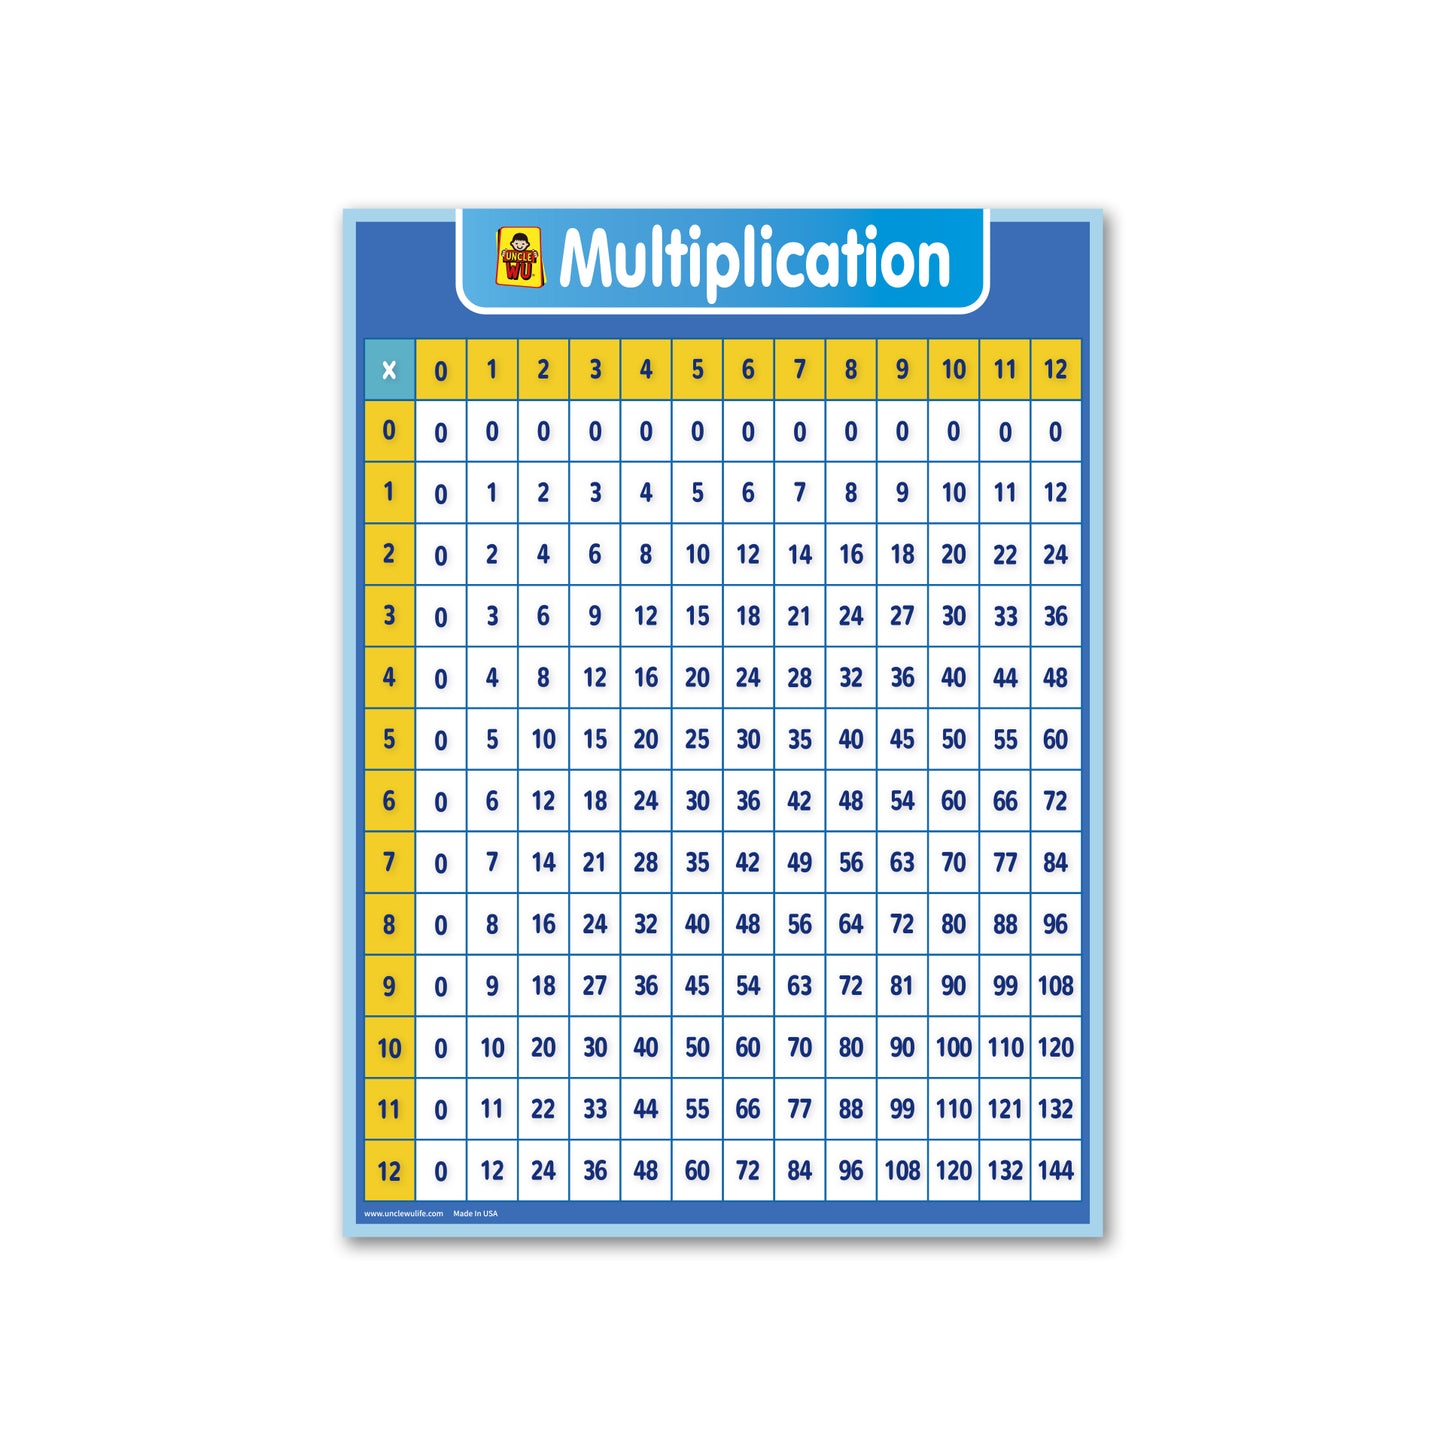 Multiplication Table Poster